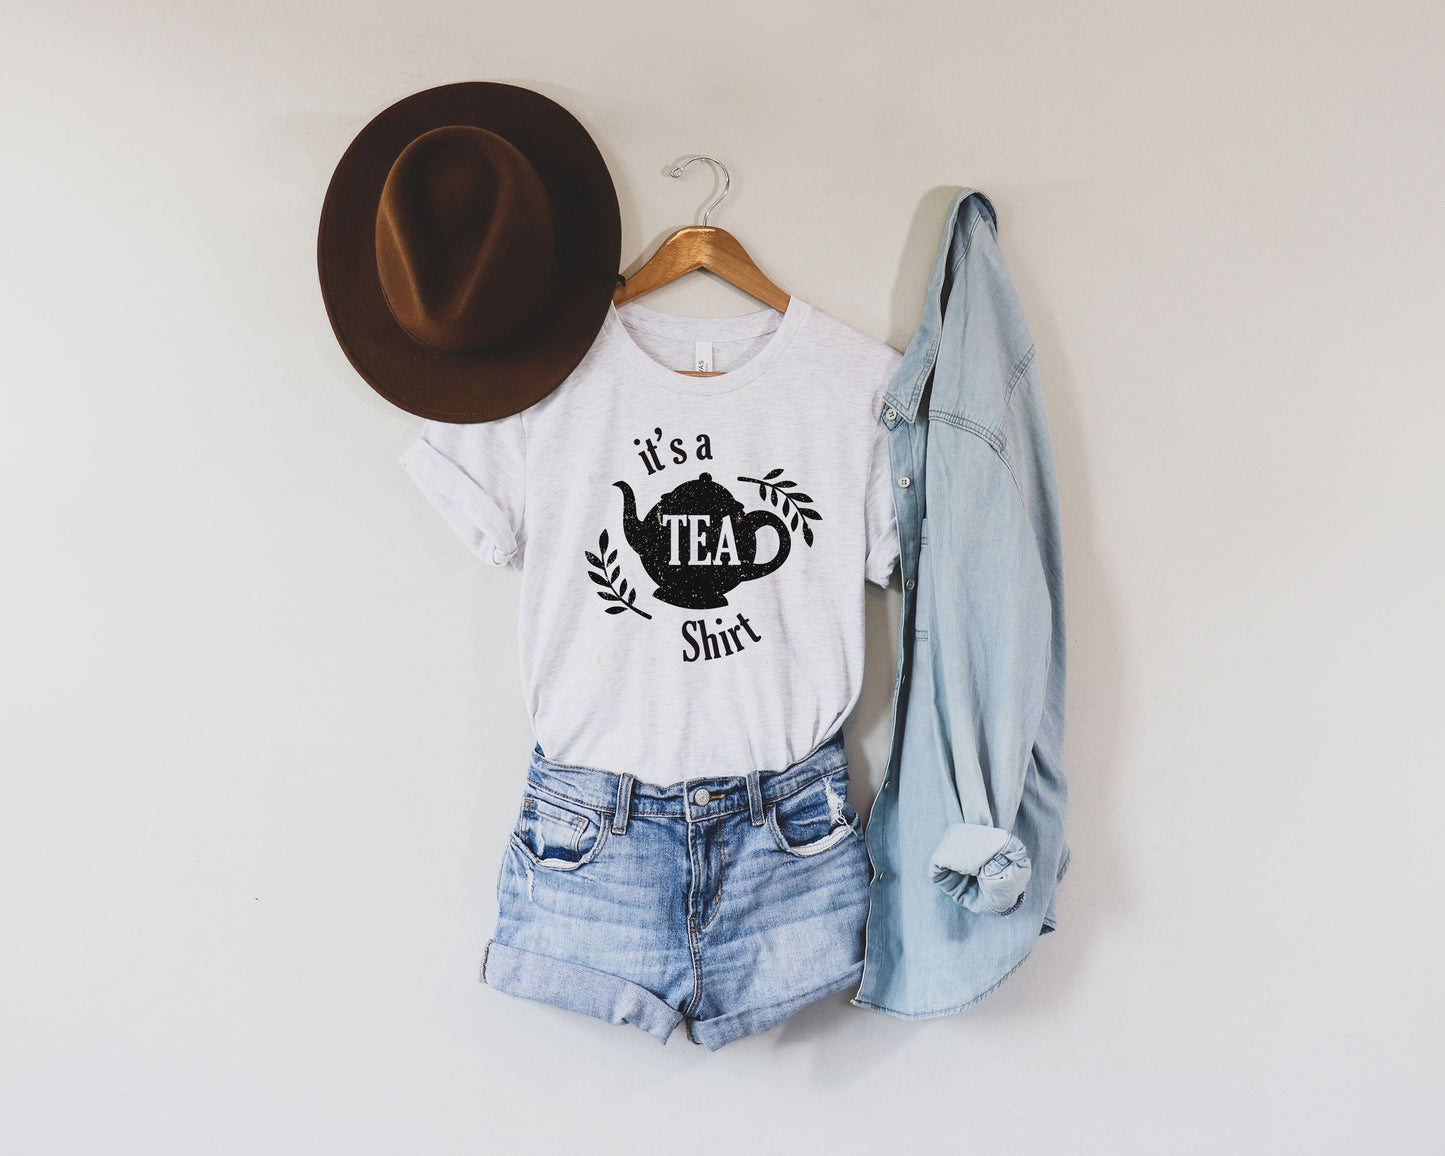 It's a Tea Shirt - Funny shirt with saying, Tea Lover